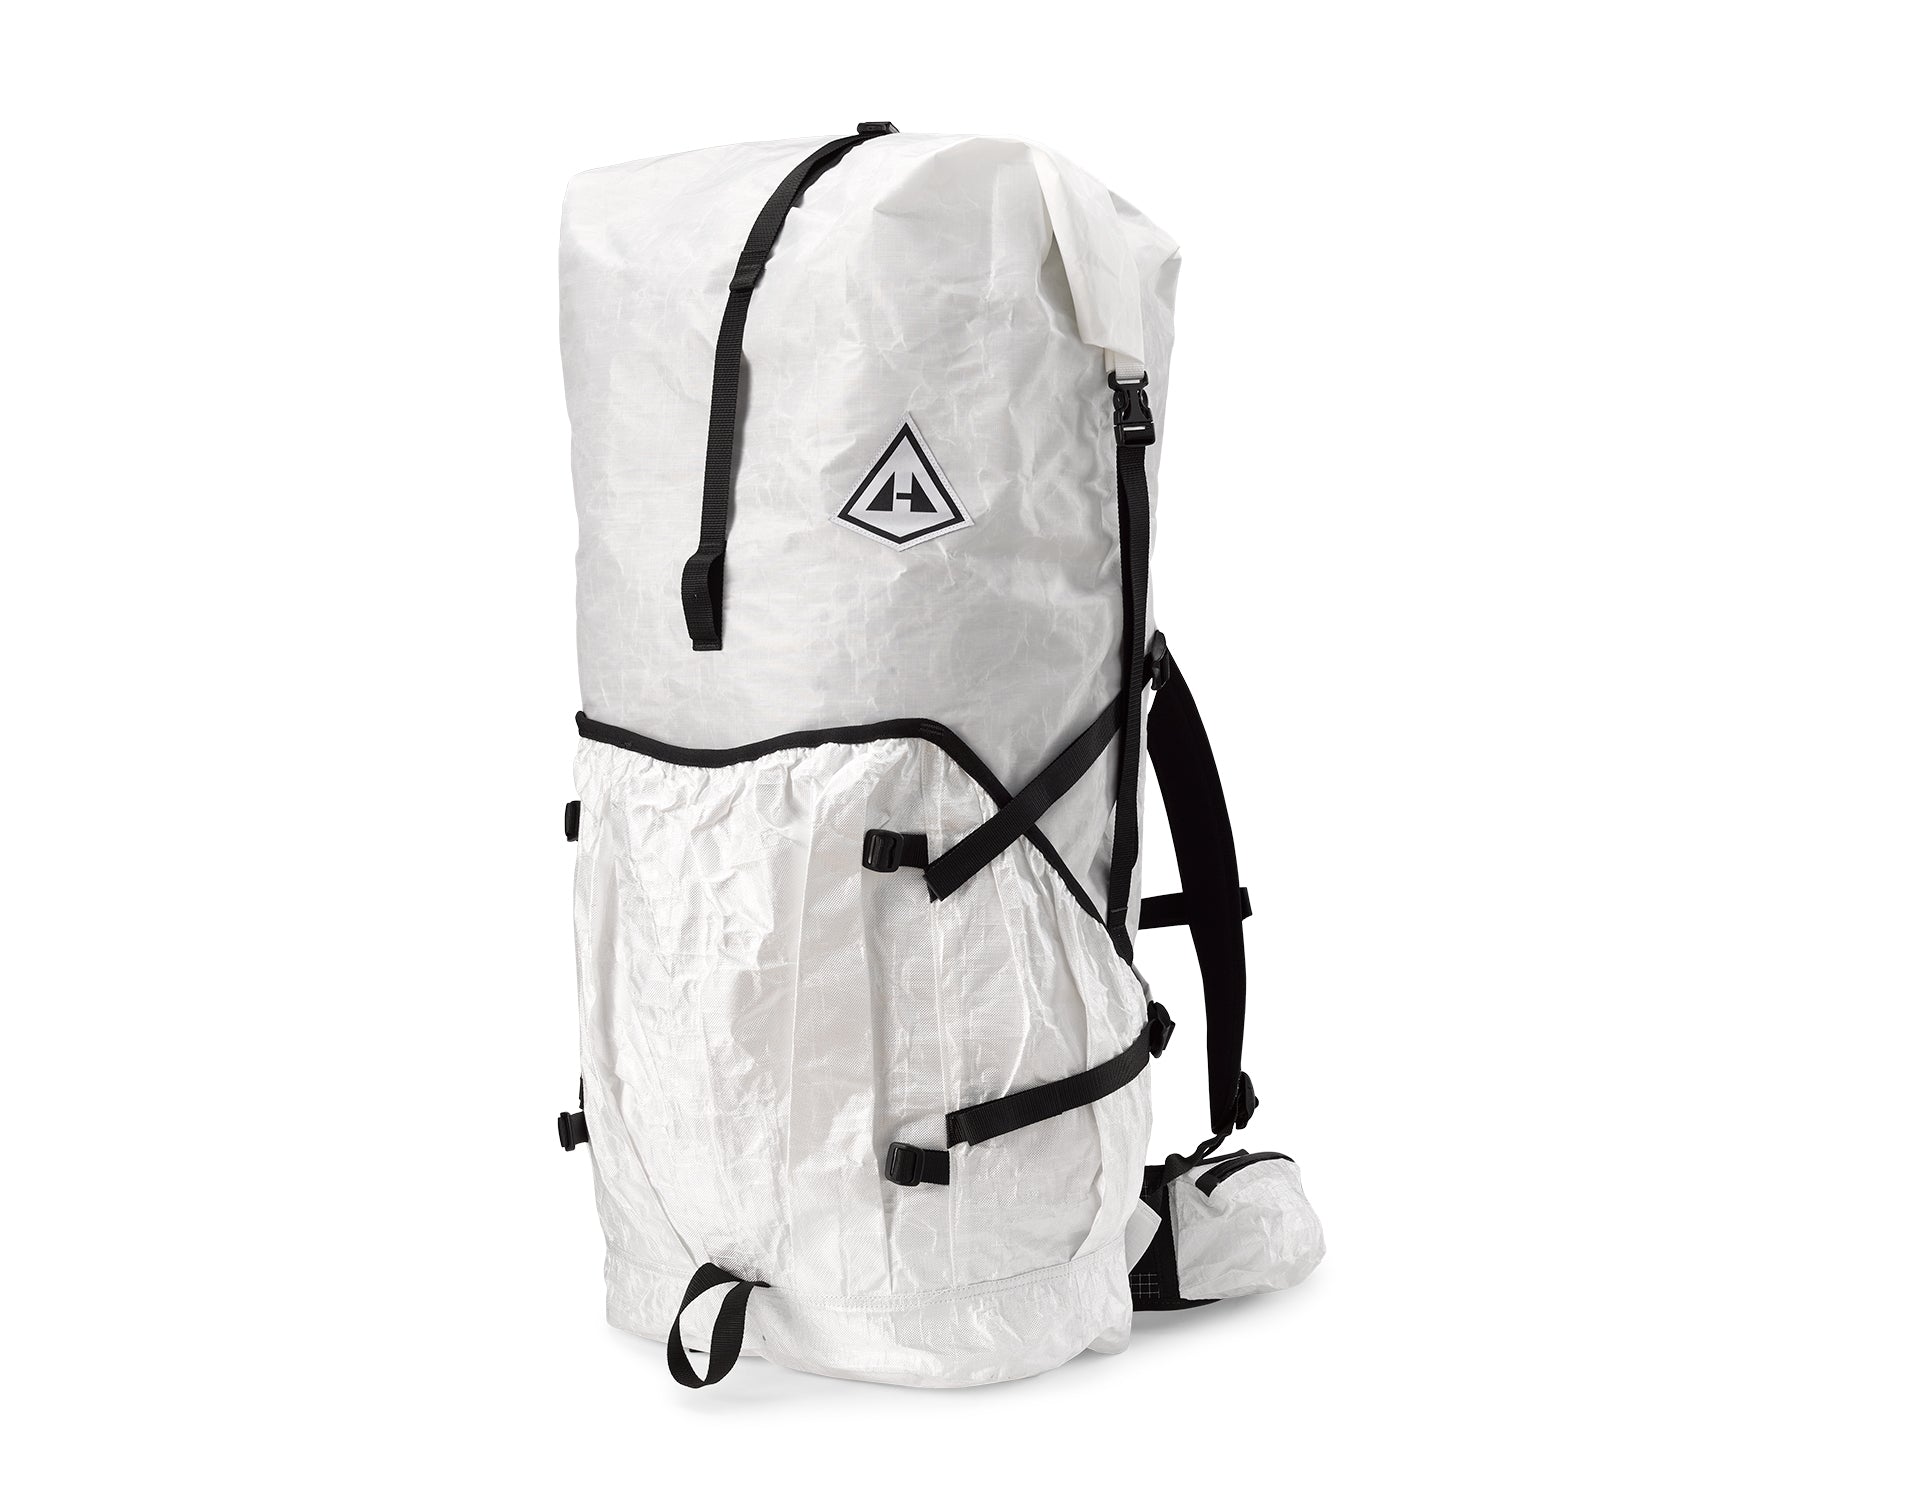 A white backpack with black straps.